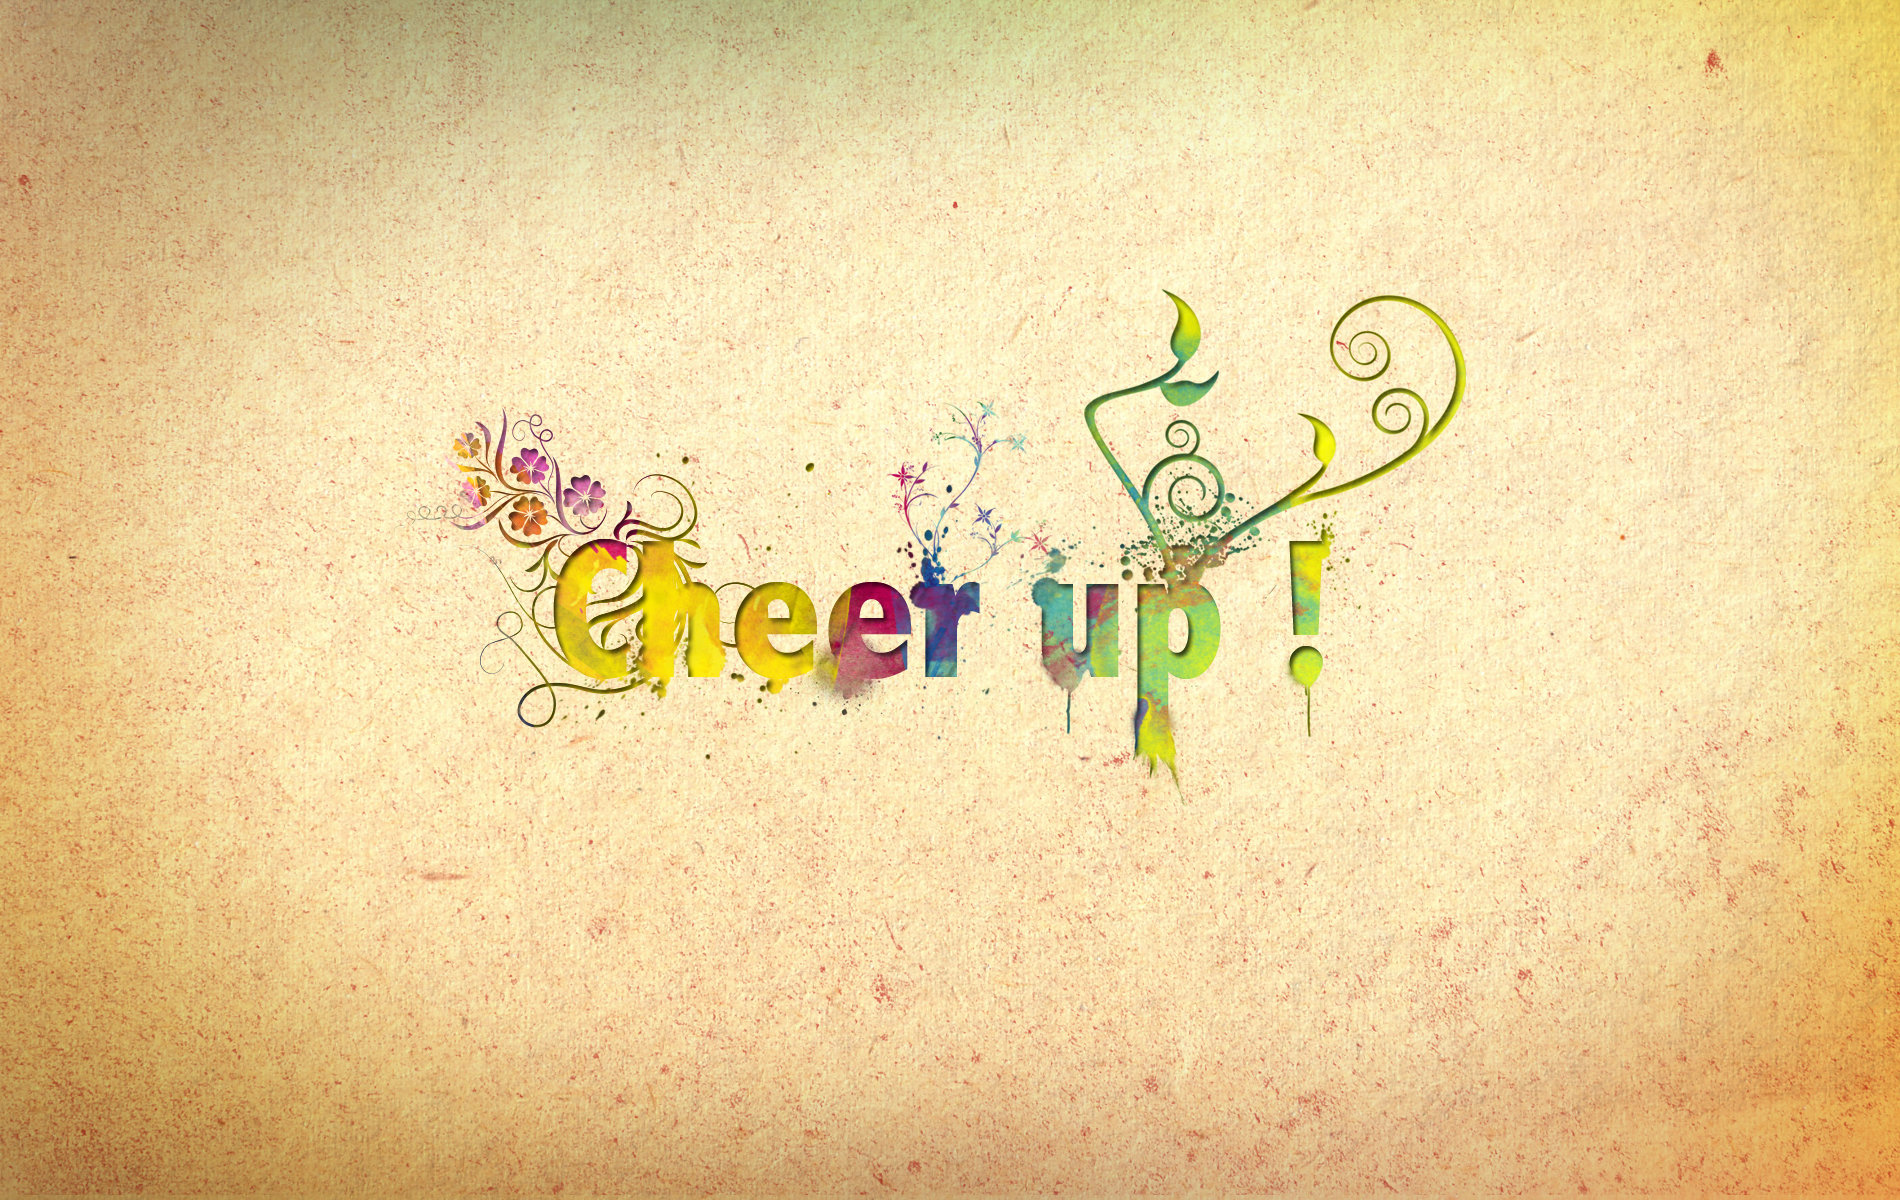 Cheer up by Potchy on